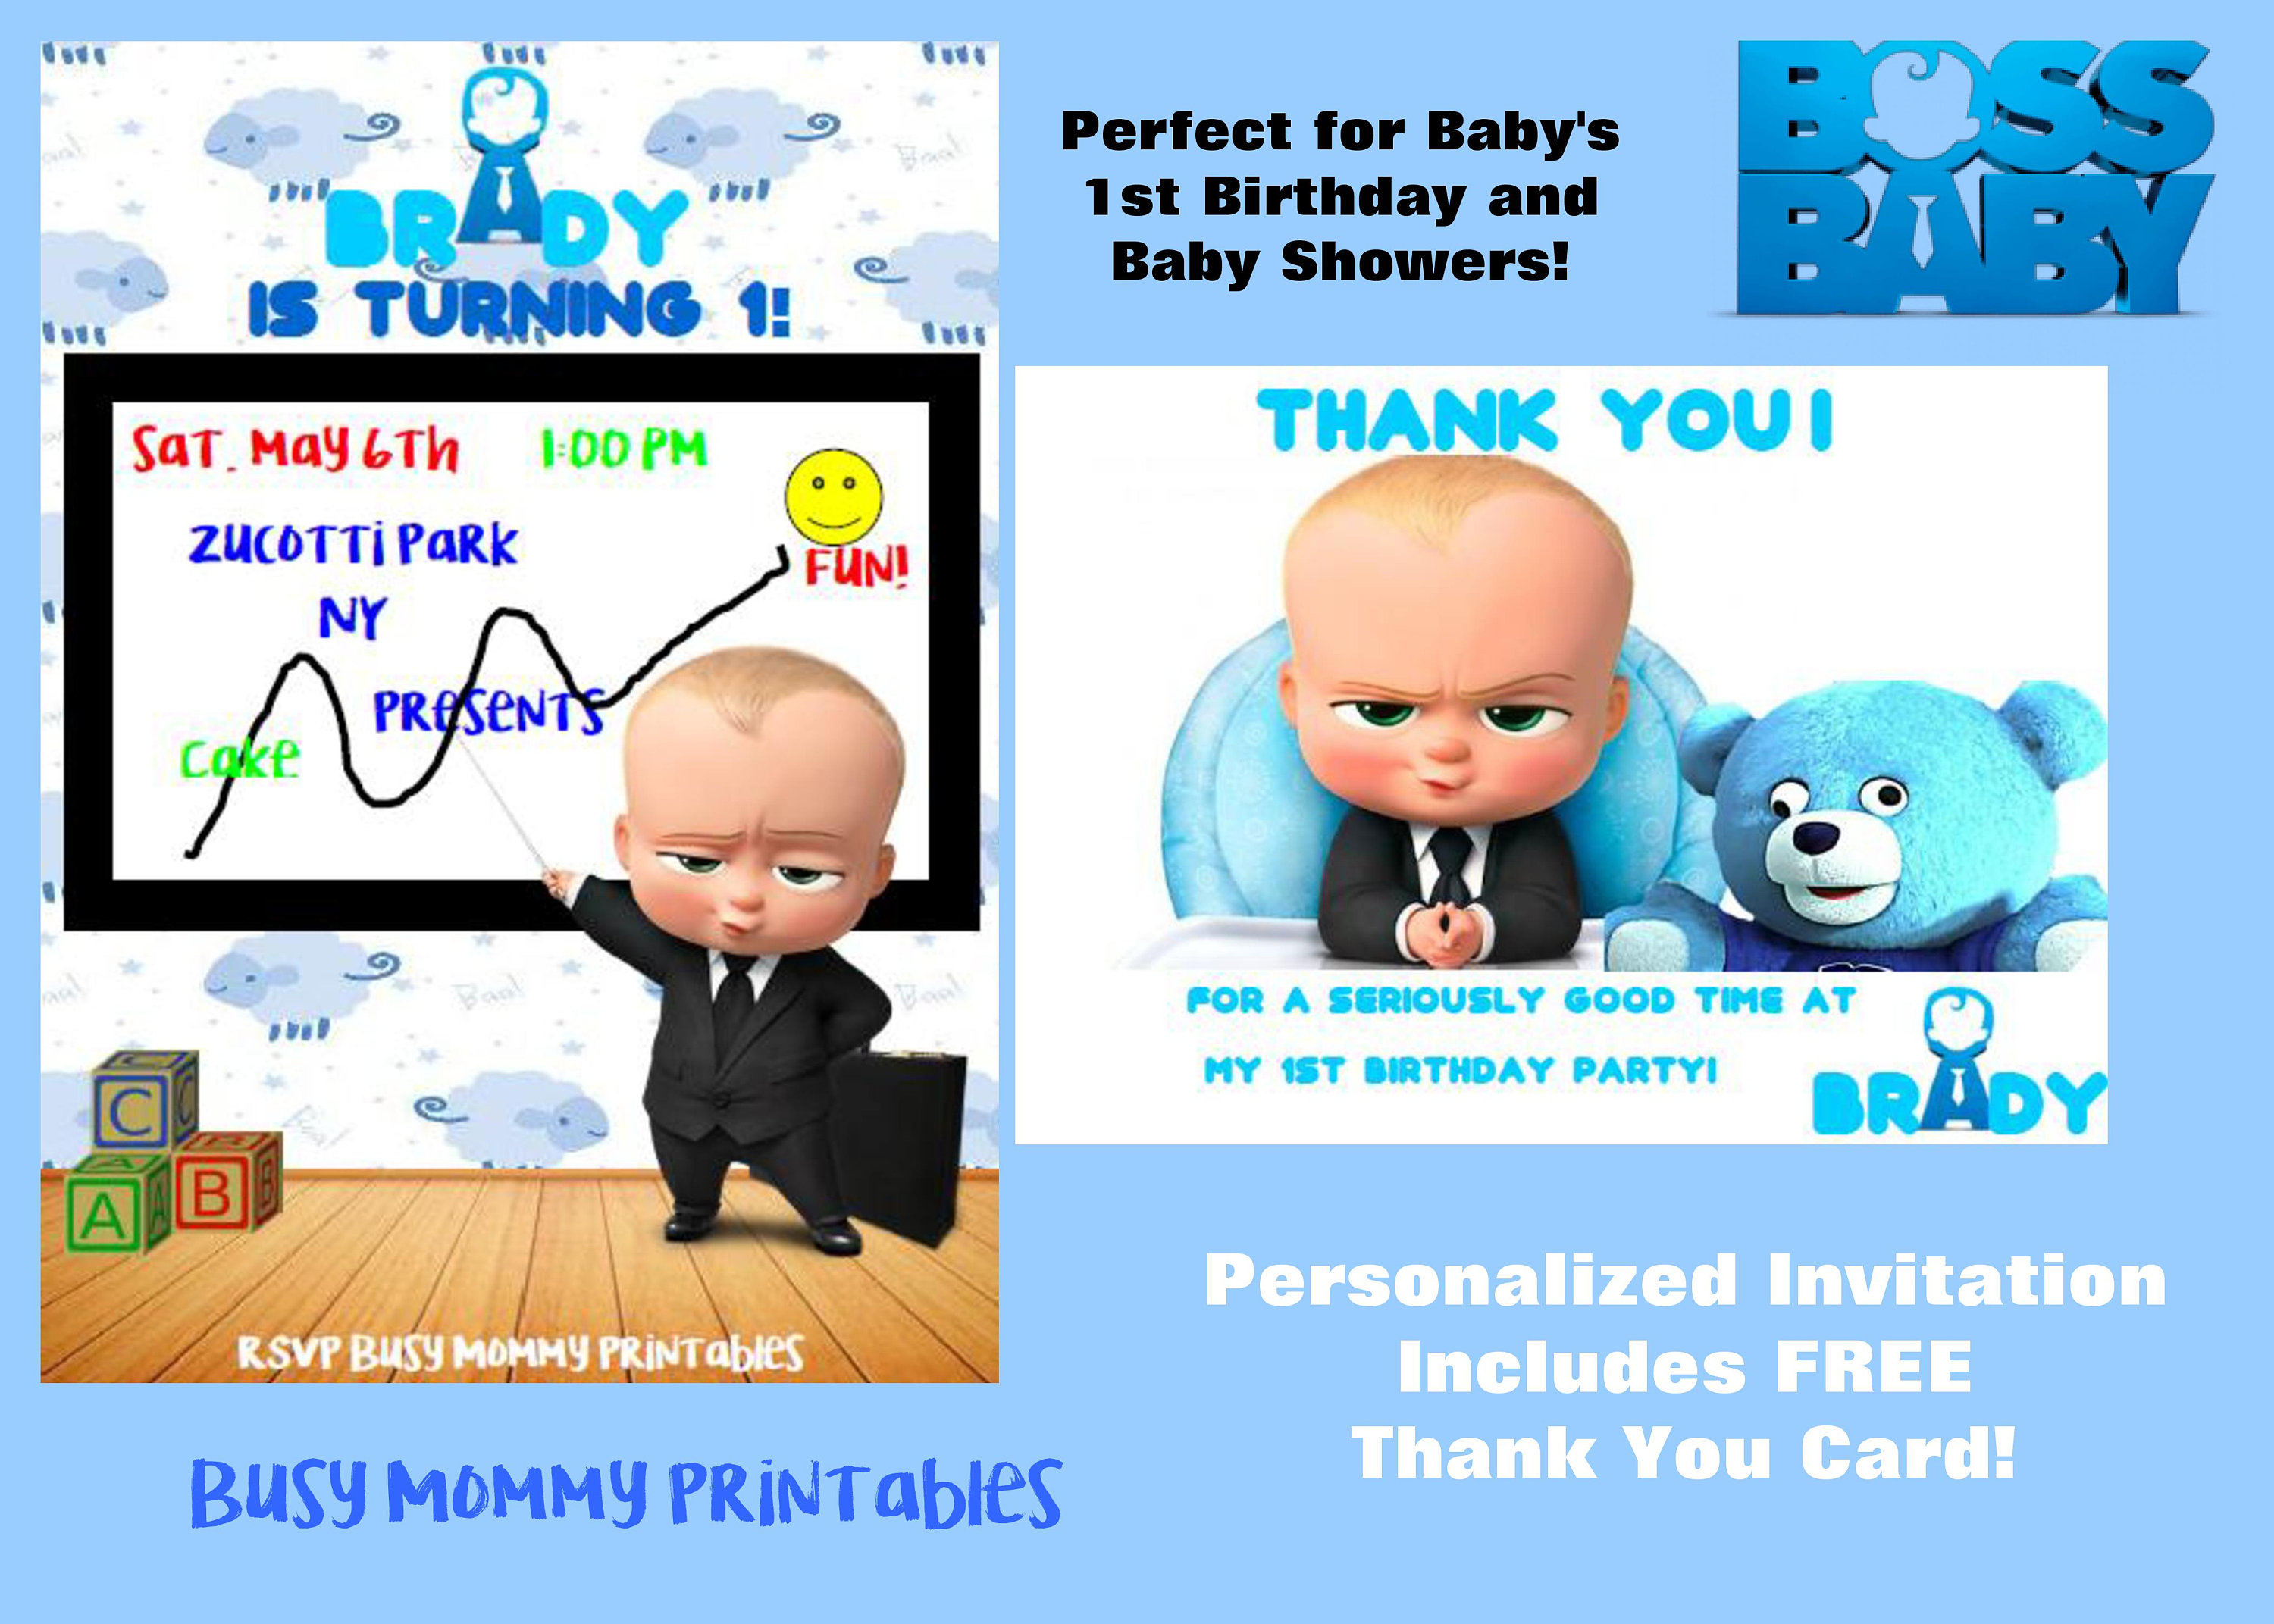 Boss Baby Inspired Personalized Invitation with FREE Thank You